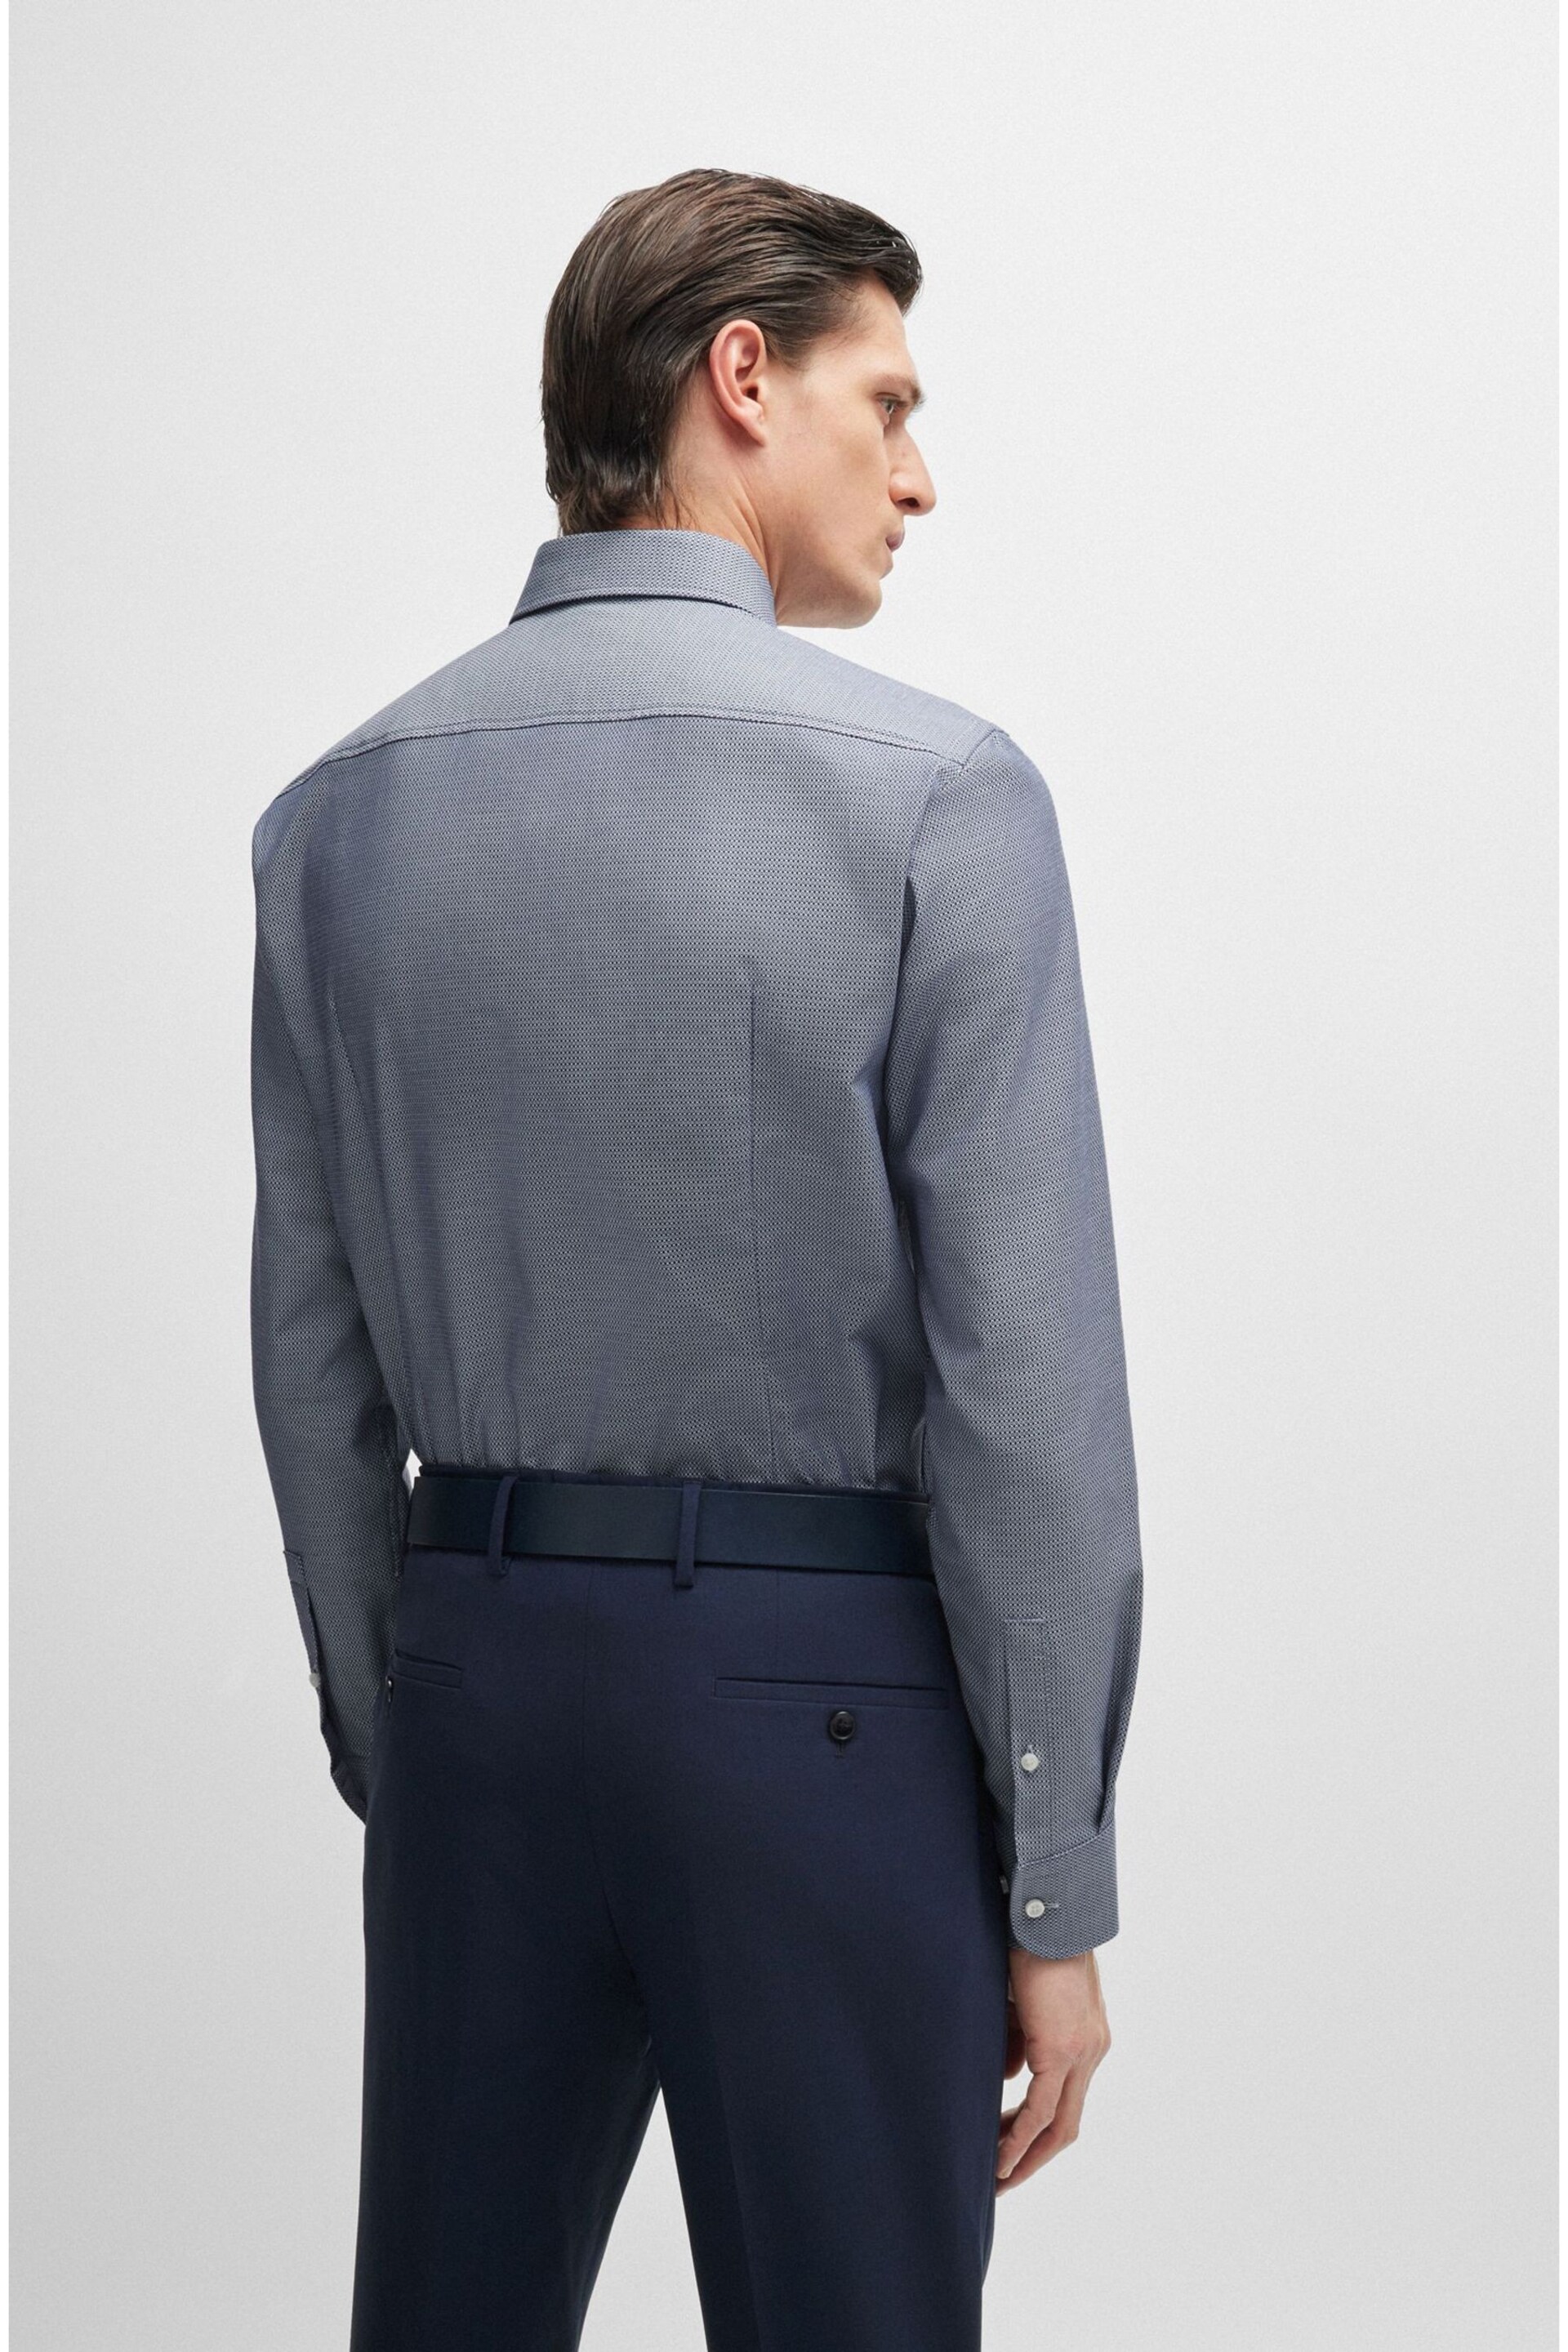 BOSS Blue Slim-Fit Shirt In Easy-Iron Structured Stretch Cotton - Image 3 of 6